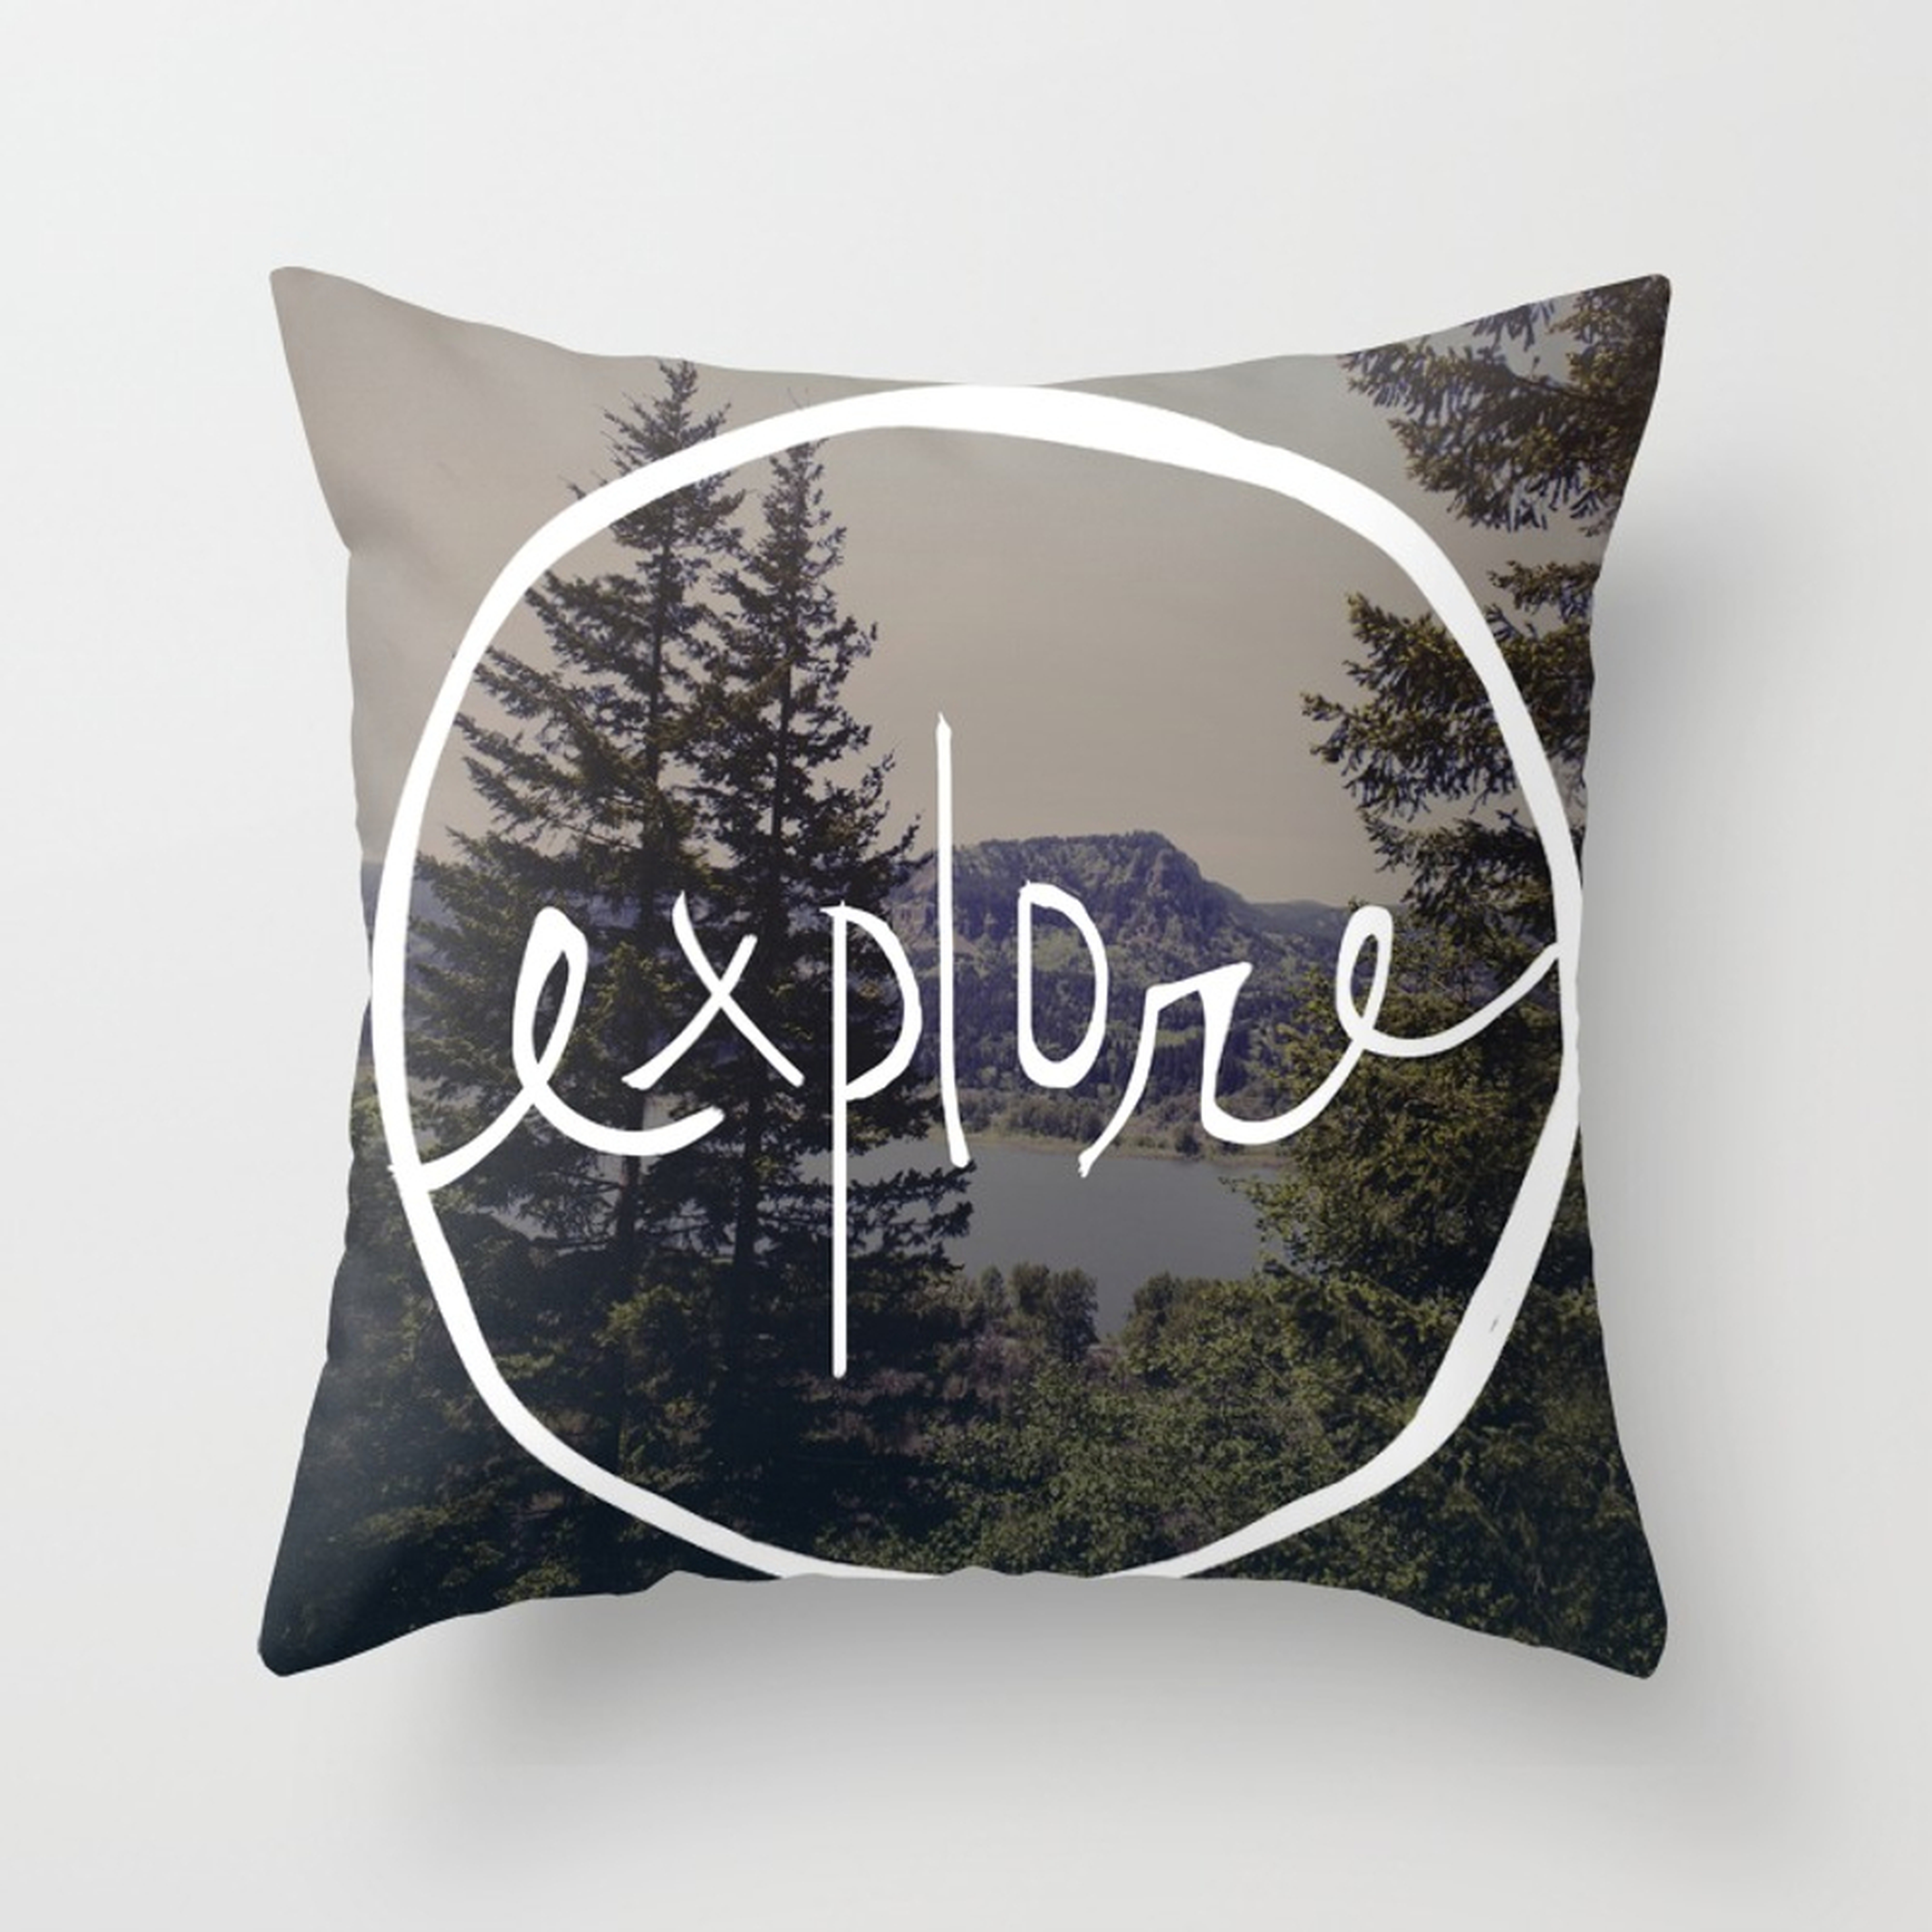 Explore Oregon Throw Pillow by Leah Flores - Cover (16" x 16") With Pillow Insert - Outdoor Pillow - Society6